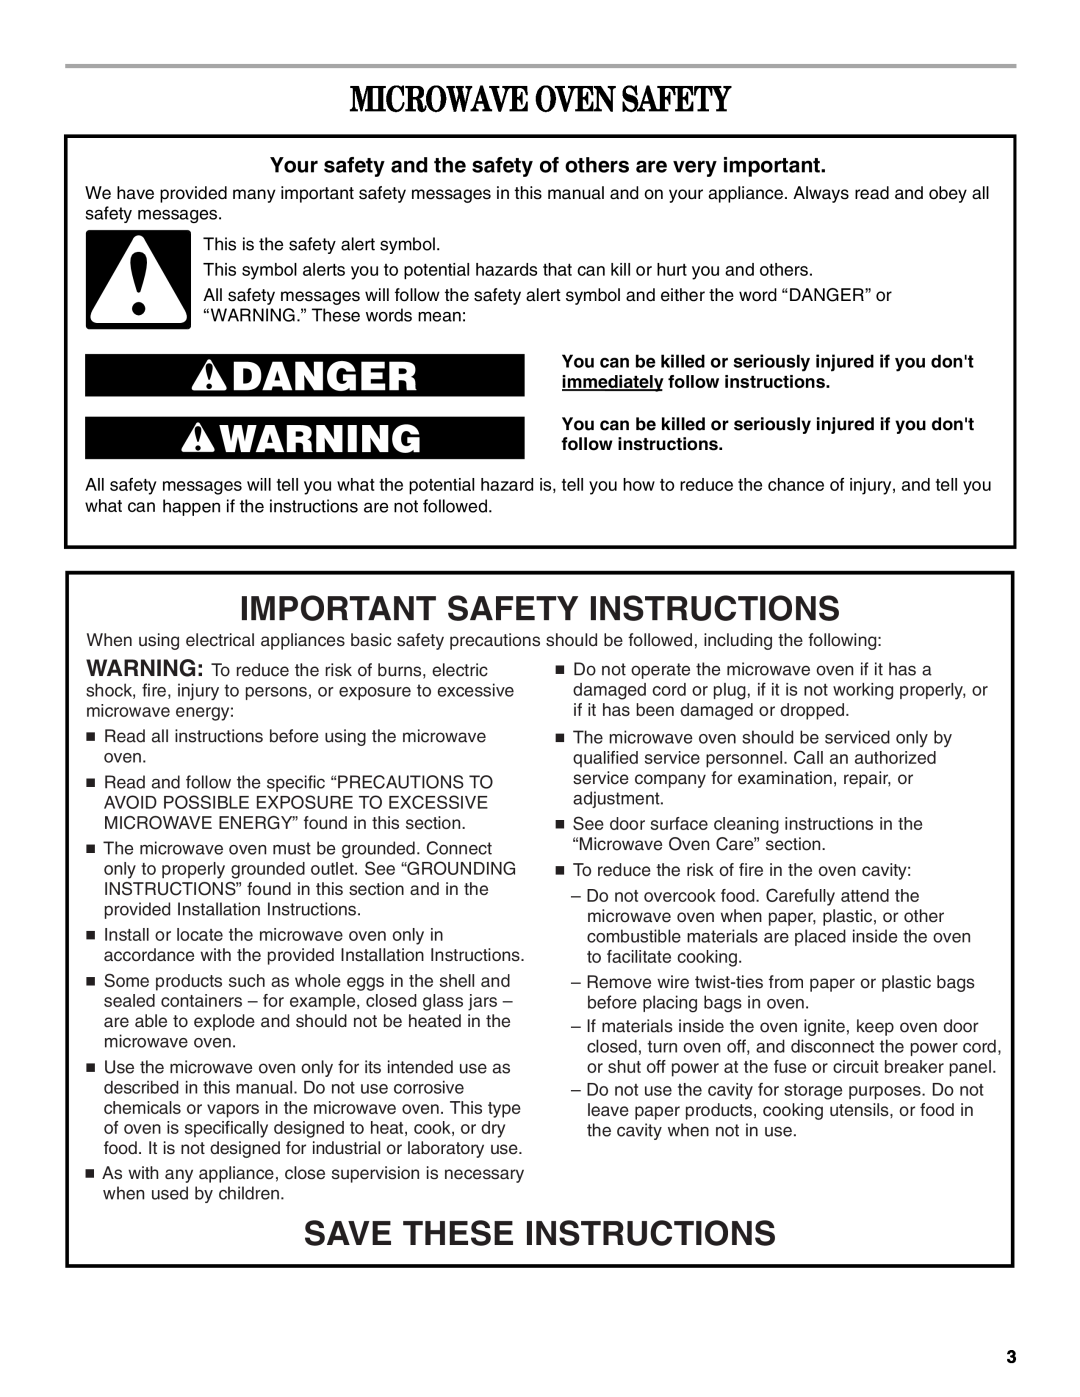 Whirlpool MH3184XPS manual Microwave Oven Safety, Important Safety Instructions, Save These Instructions 